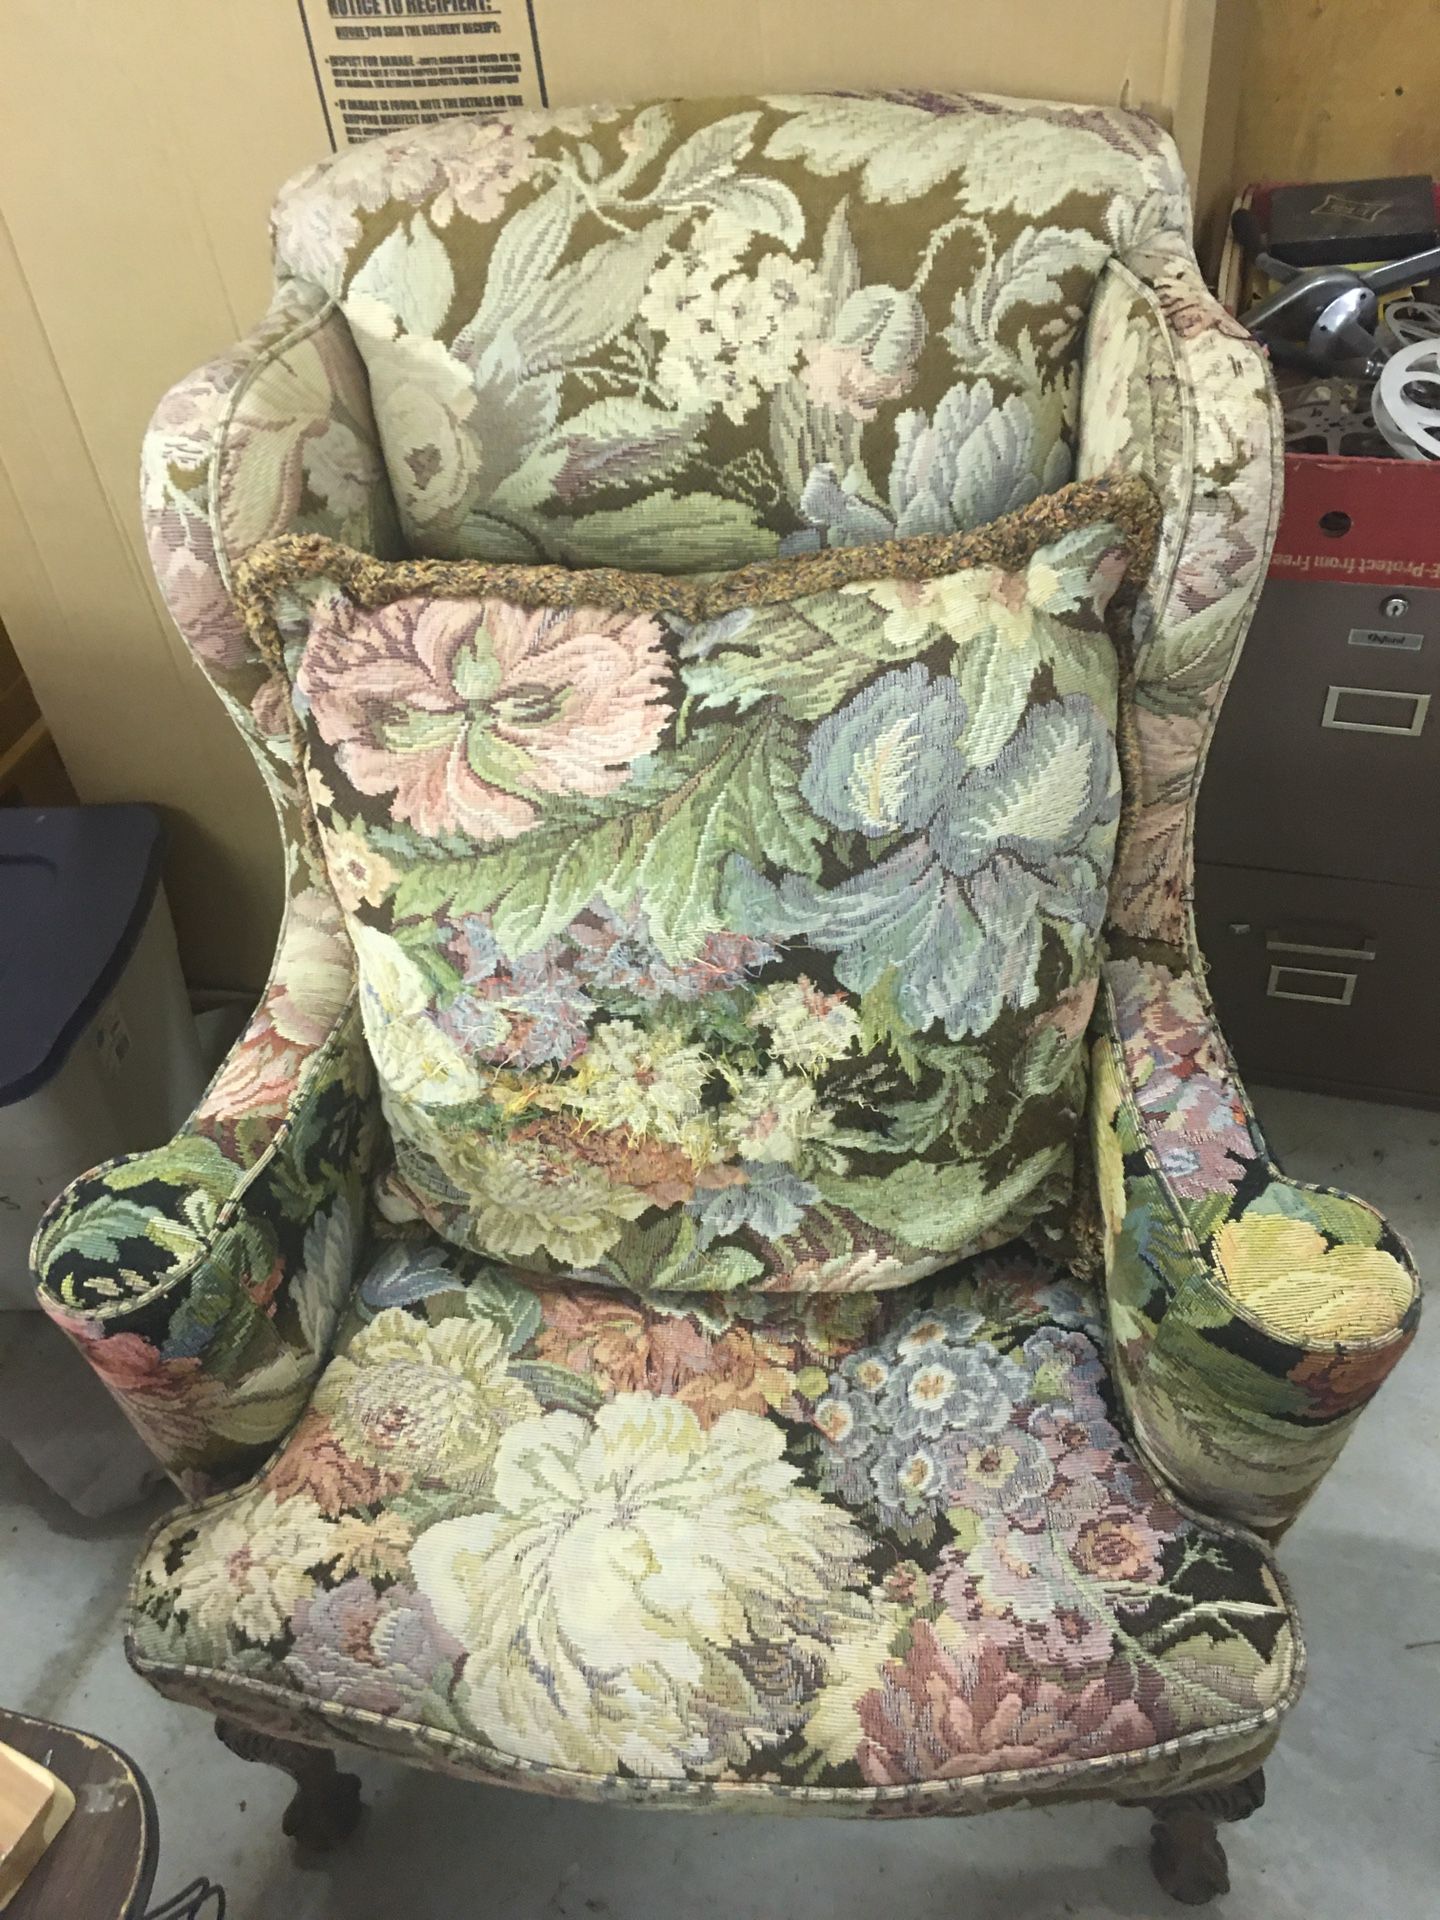 2 Large Matching Wingback Chairs ($50ea.)With Covers And Pillows